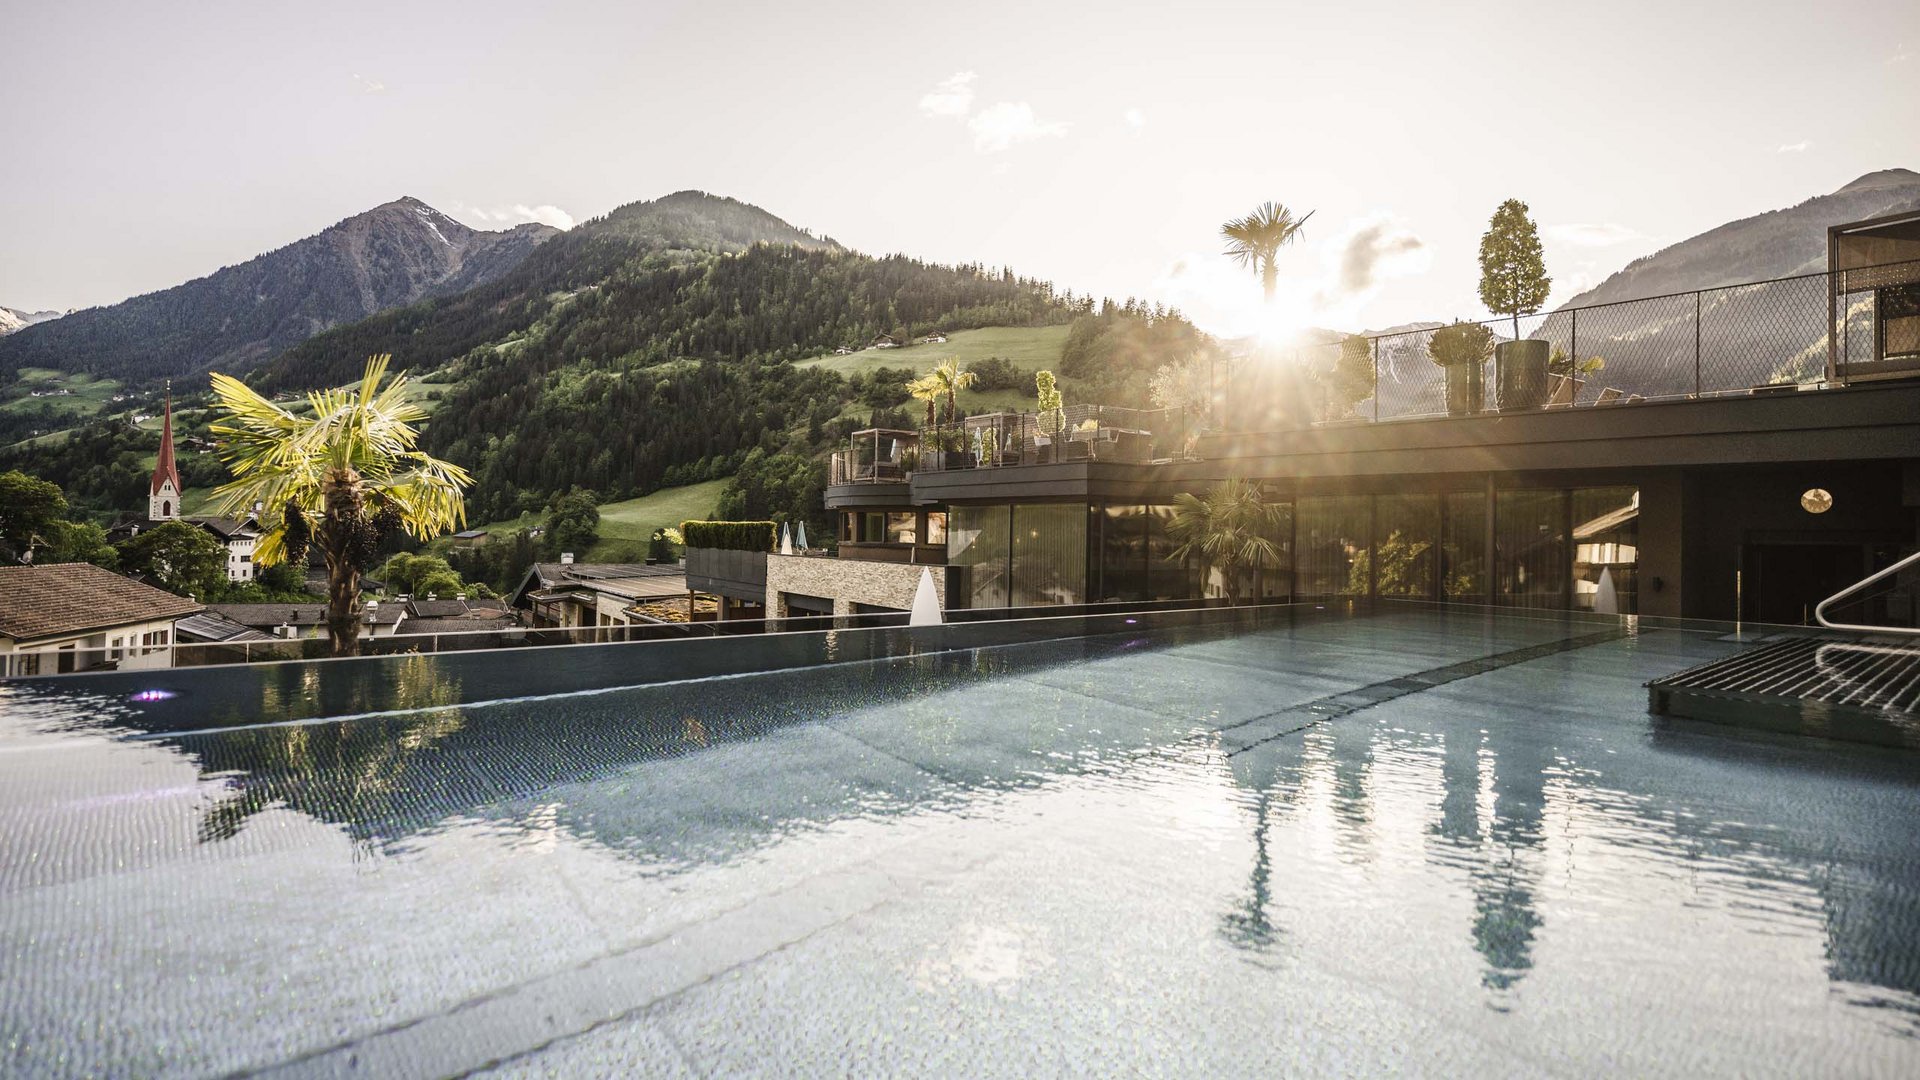 Your hotel in South Tyrol with an infinity pool